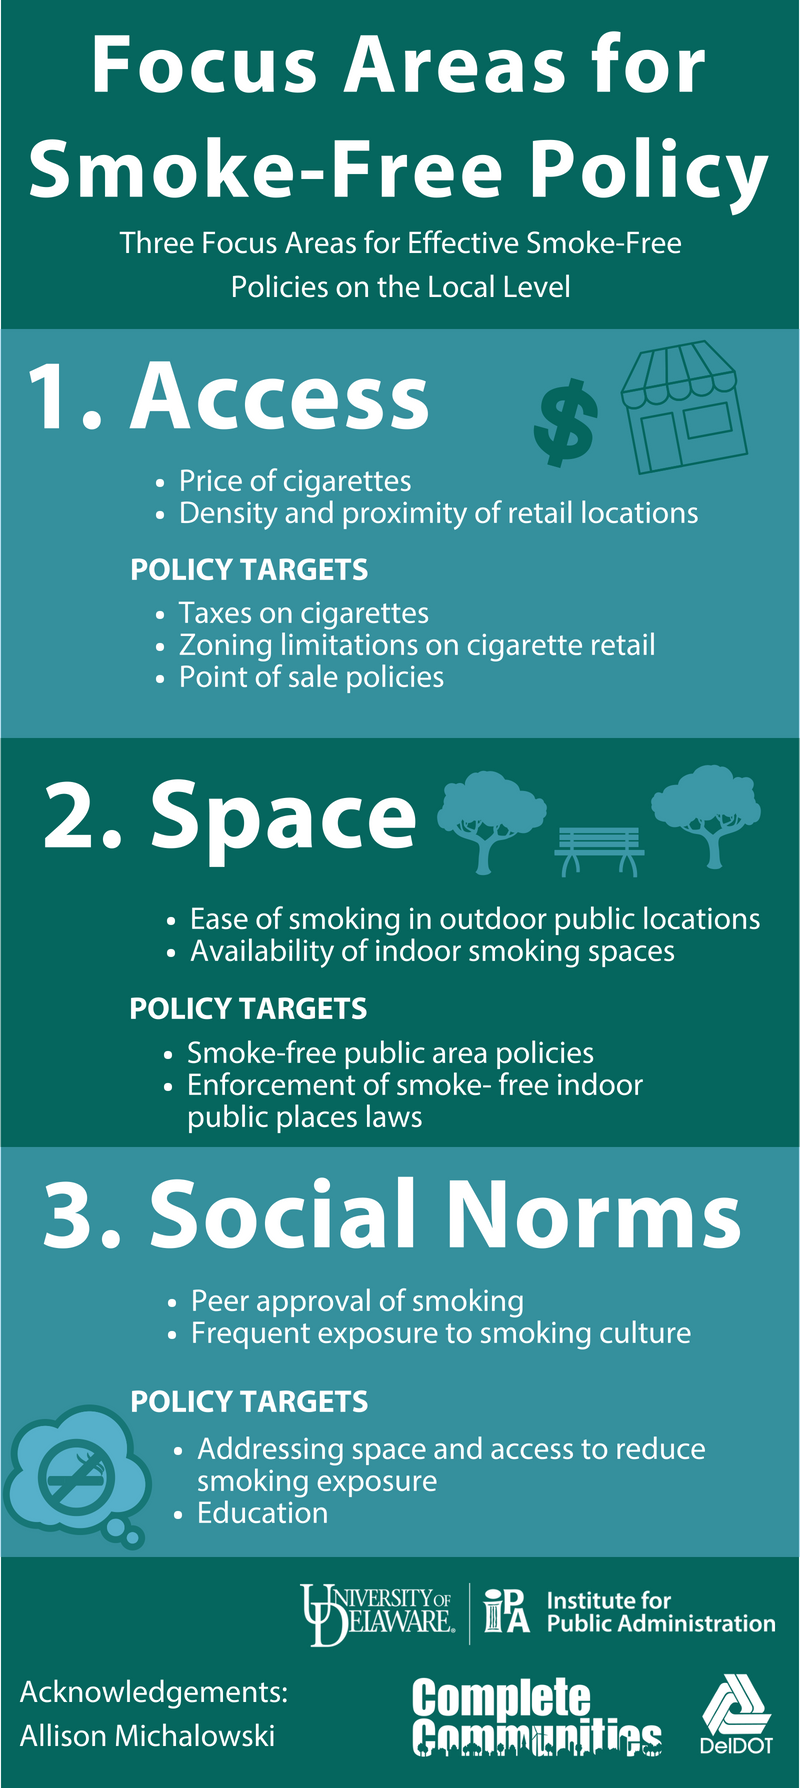 Three Focus Areas for Effective Smoke-Free Policies on the Local Level: 1. Limiting Access by increasing prices and limiting zoning for retail, 2. Restricting the locations where smoking is acceptable, 3. Changing the culture and social norms so that smoking is not desirable.